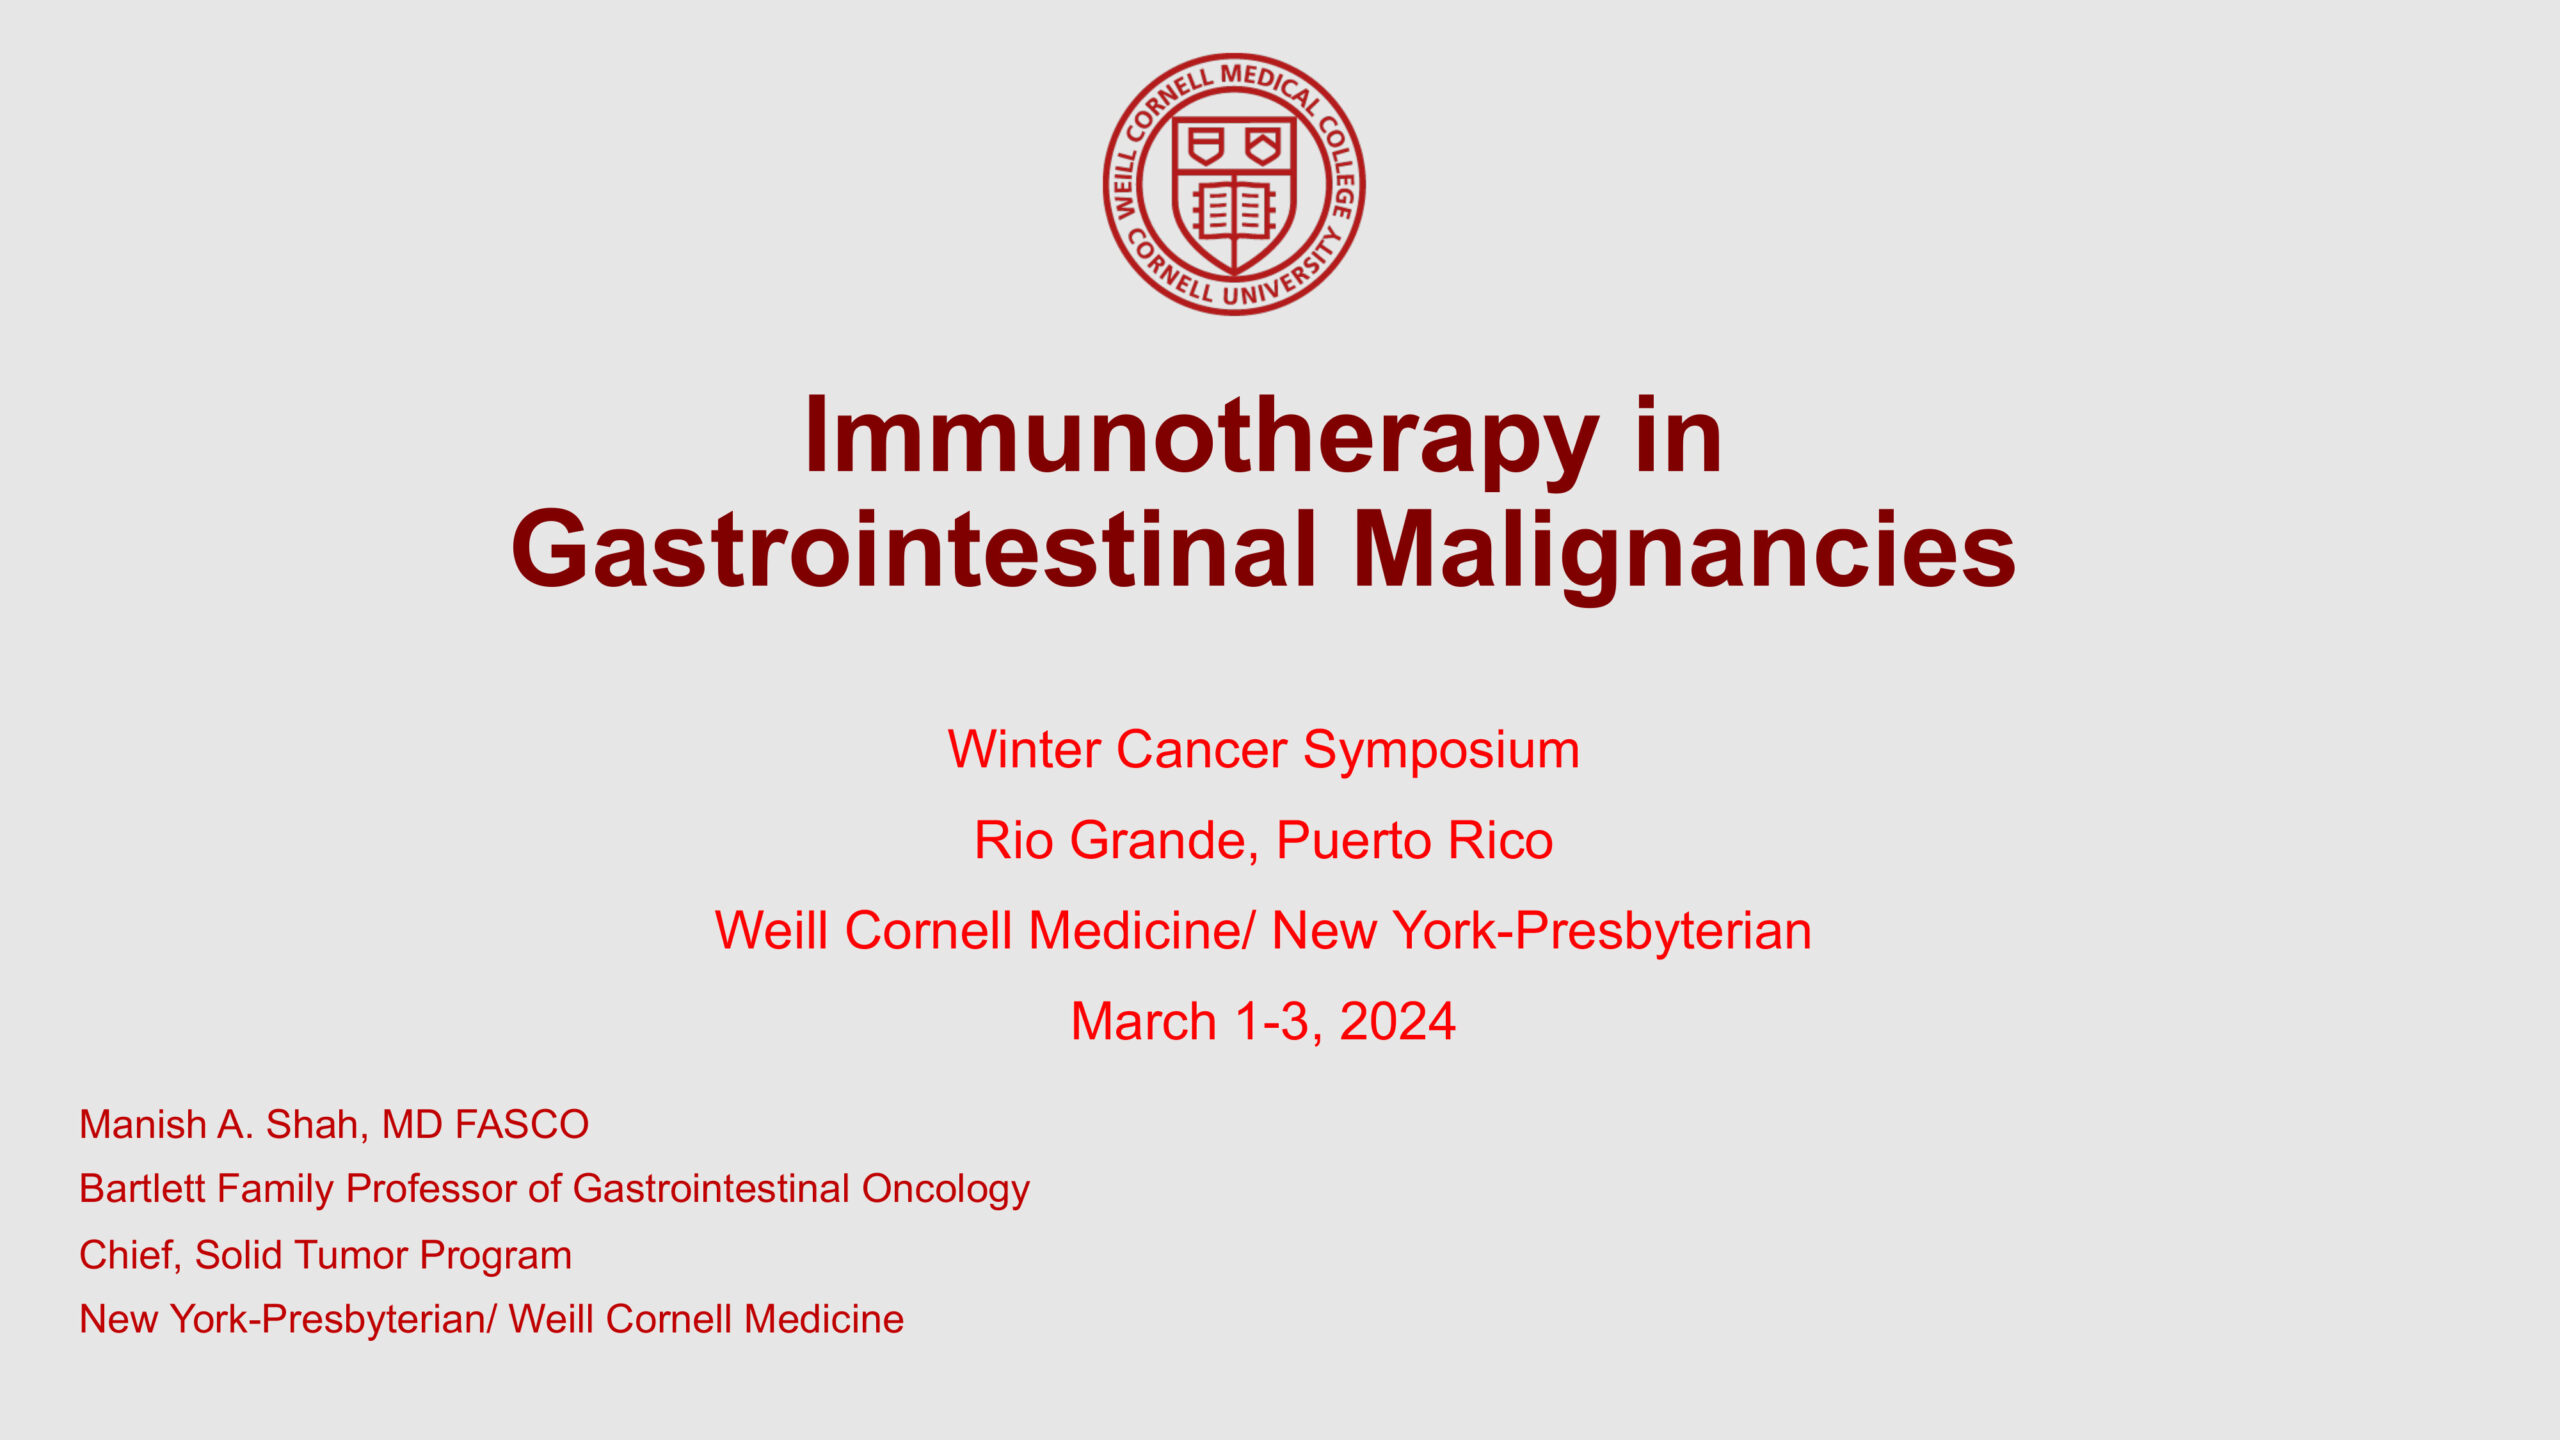 Establishing Immunotherapy Management in Gastrointestinal Cancers